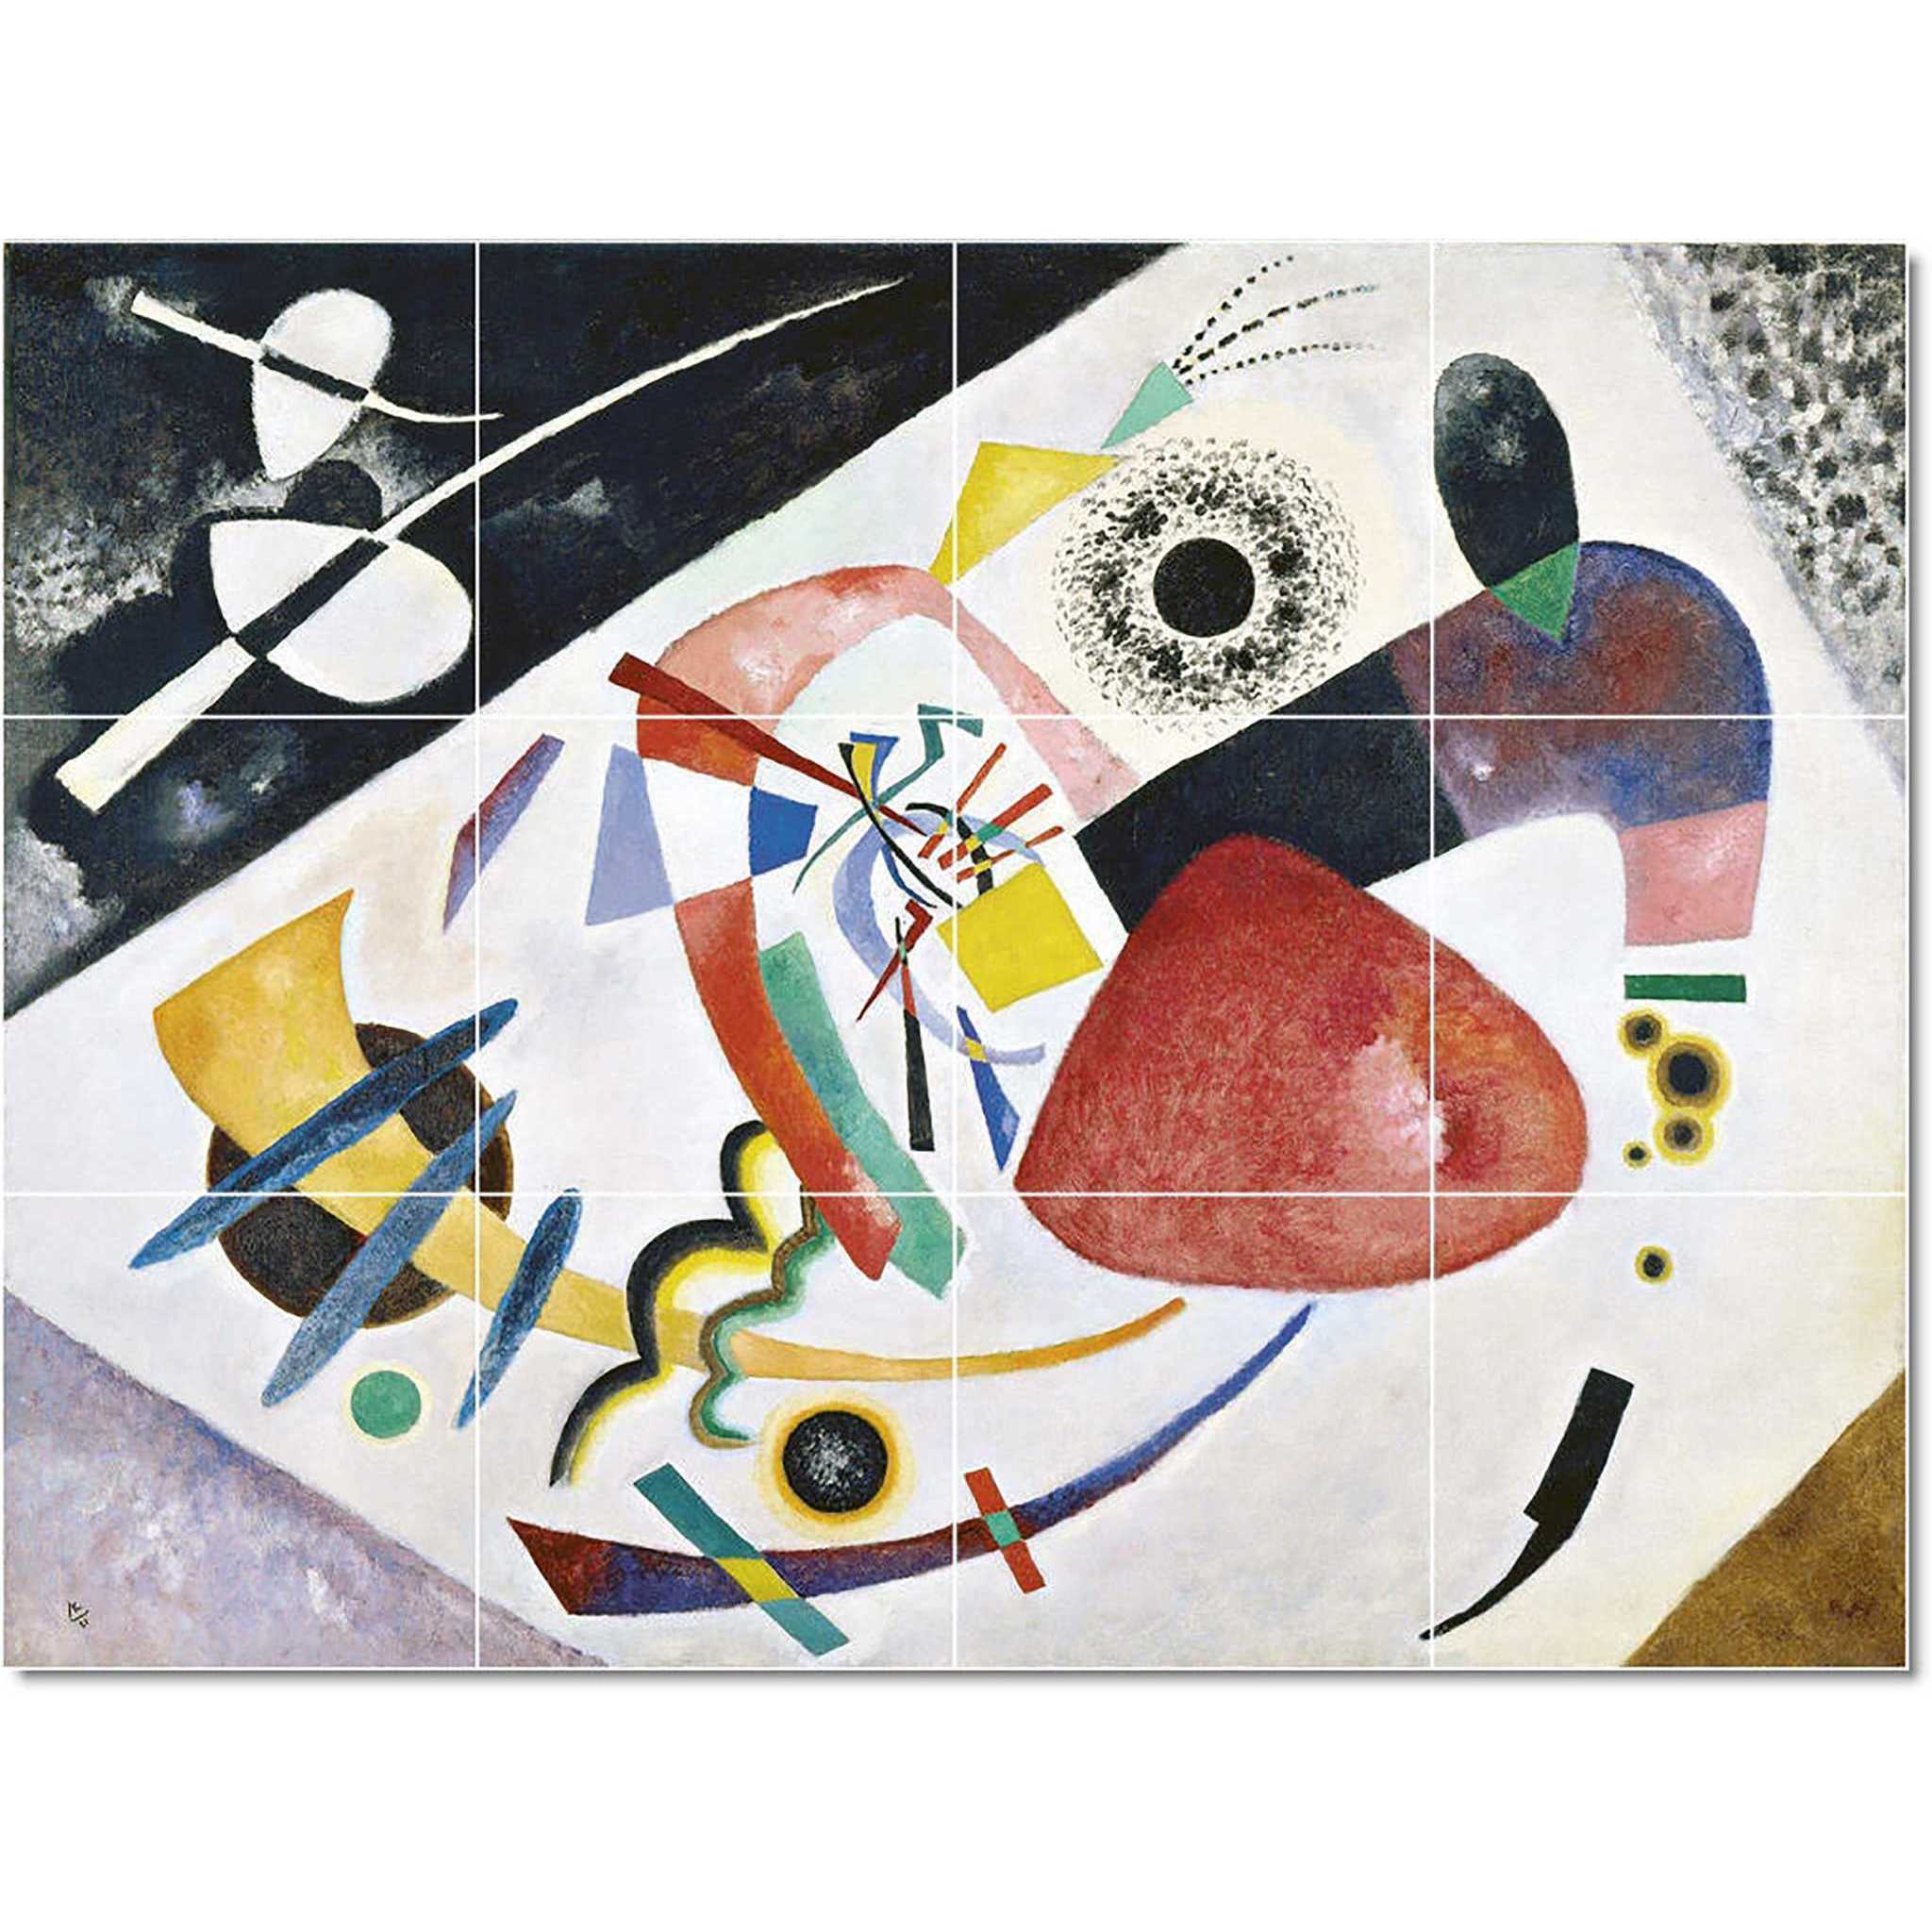 wassily kandinsky abstract painting ceramic tile mural p22730